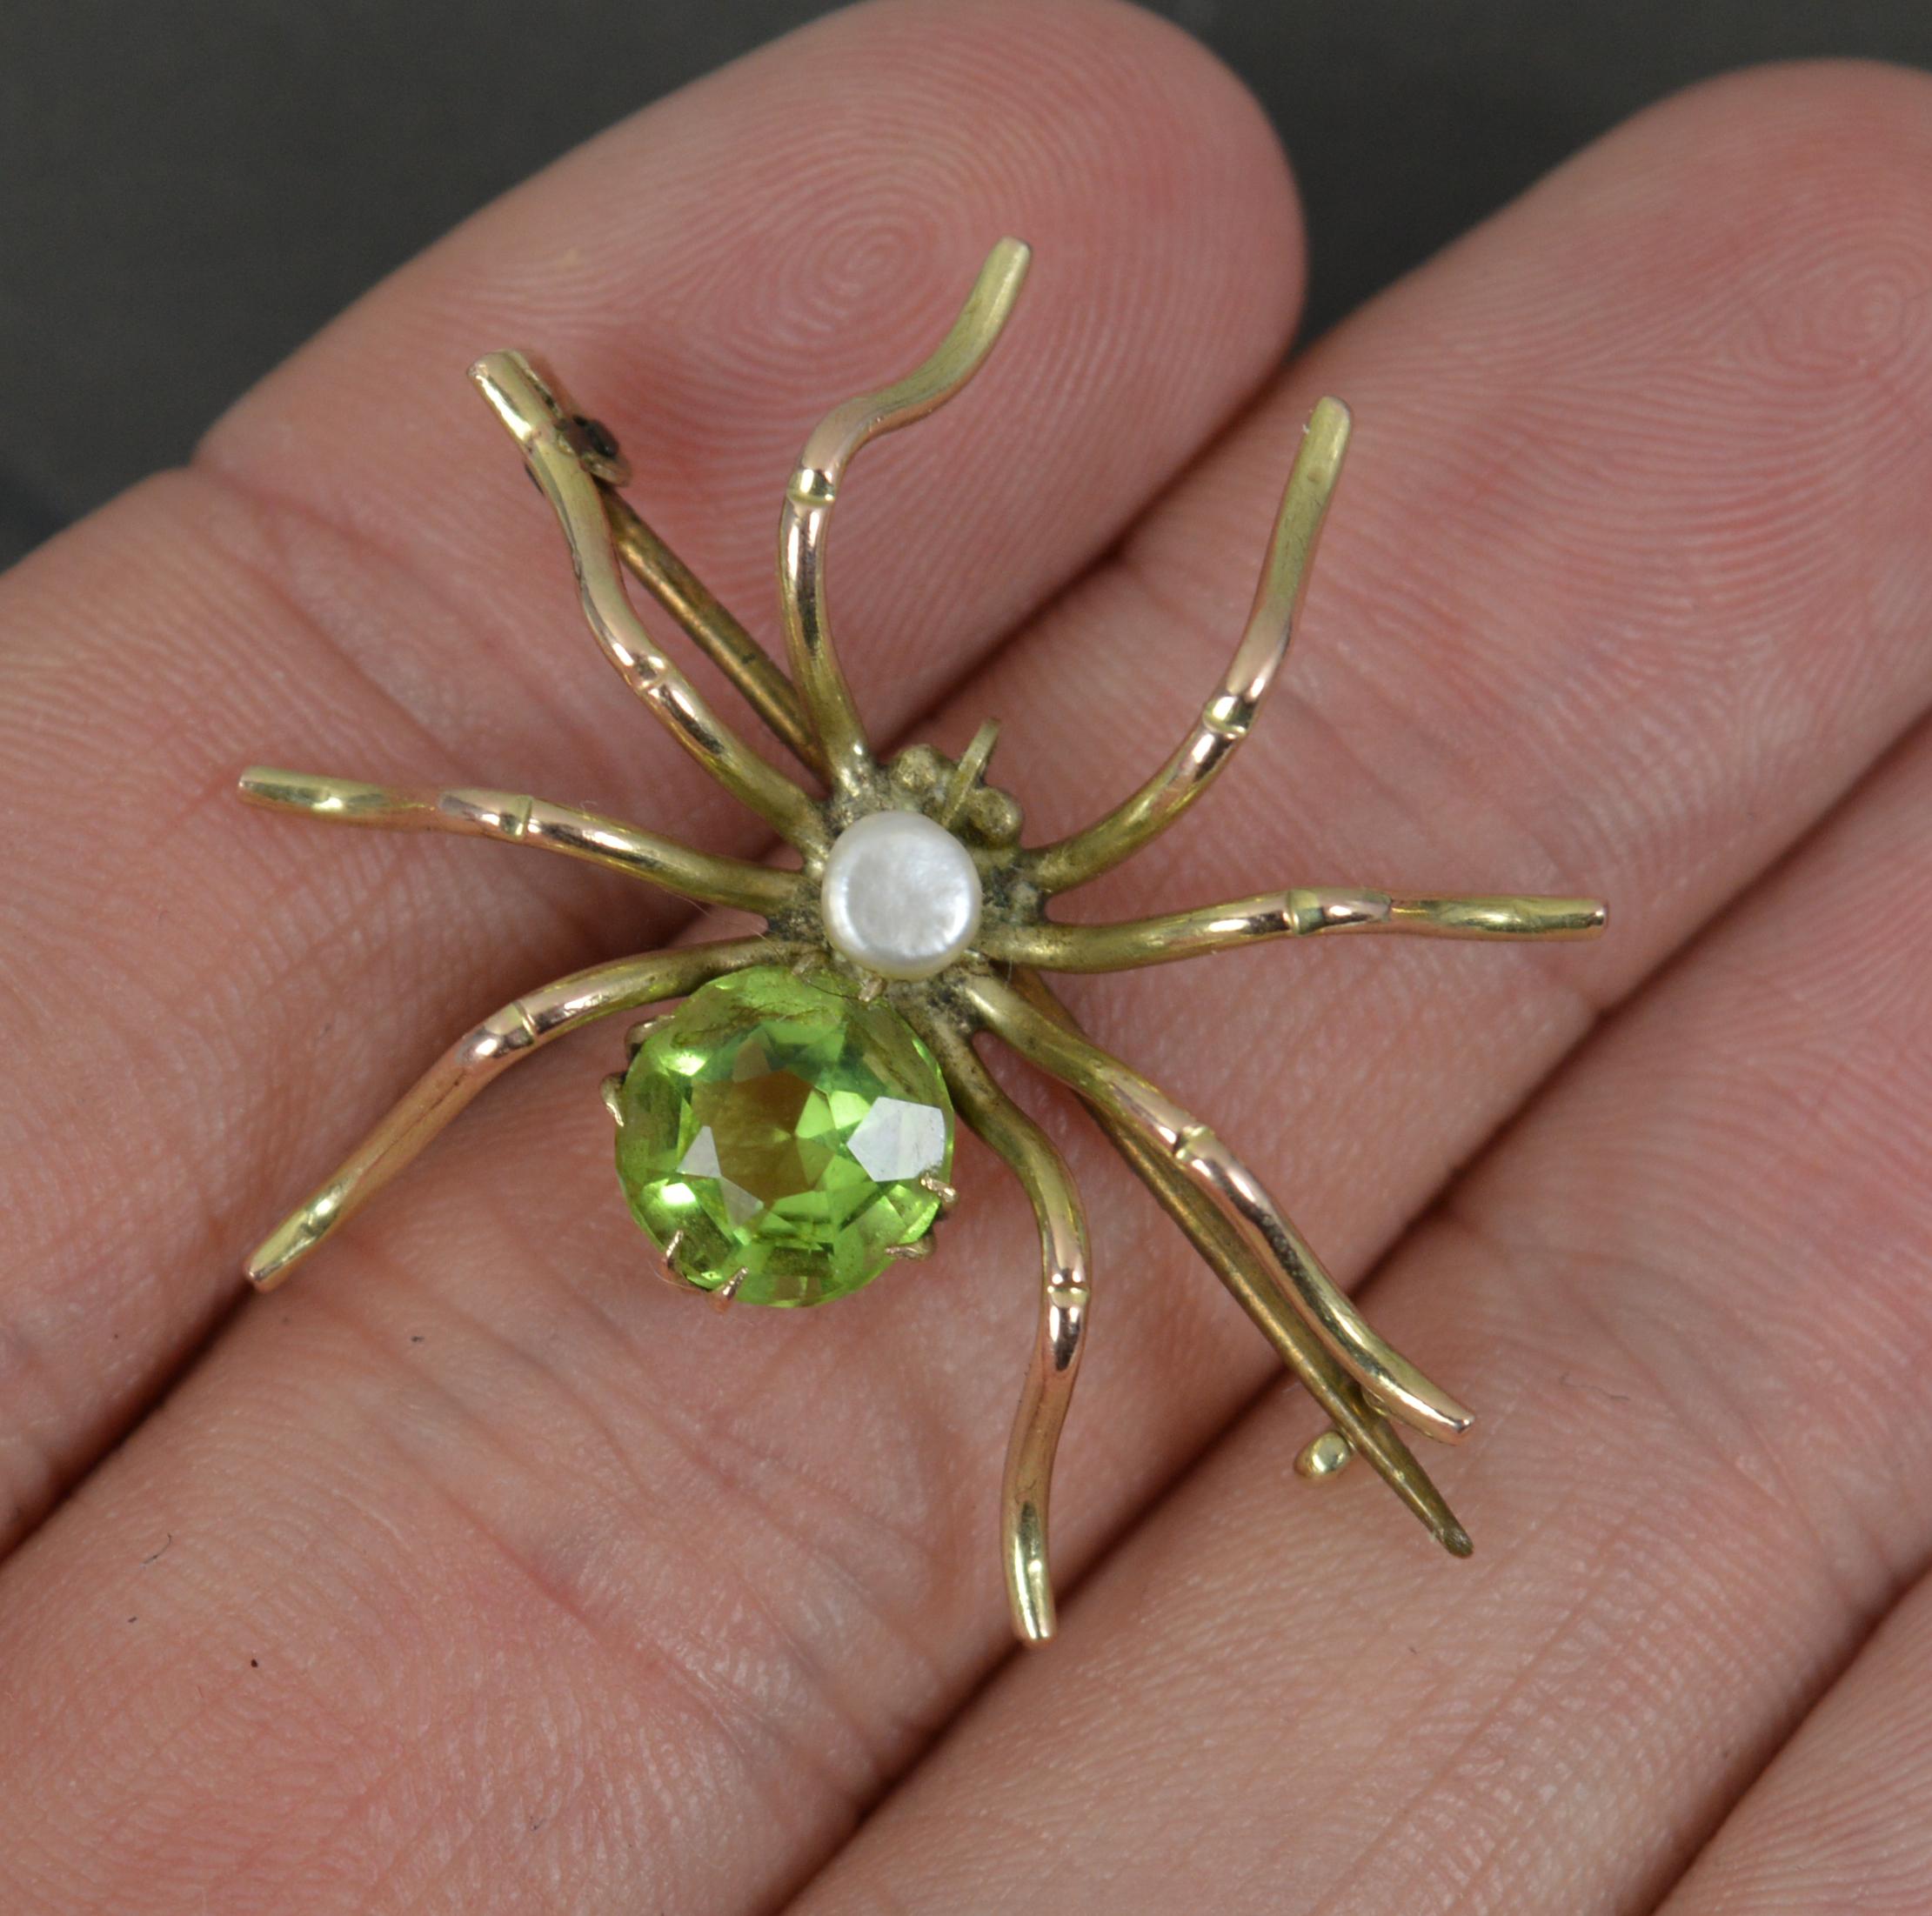 A fantastic late Victorian period pendant.
Solid 9 carat yellow gold example.
Novelty shape in the form of a spider.
The body comprises of a pearl to head and larger green peridot to body.

CONDITION ; Very good. Crisp gold section, issue free.